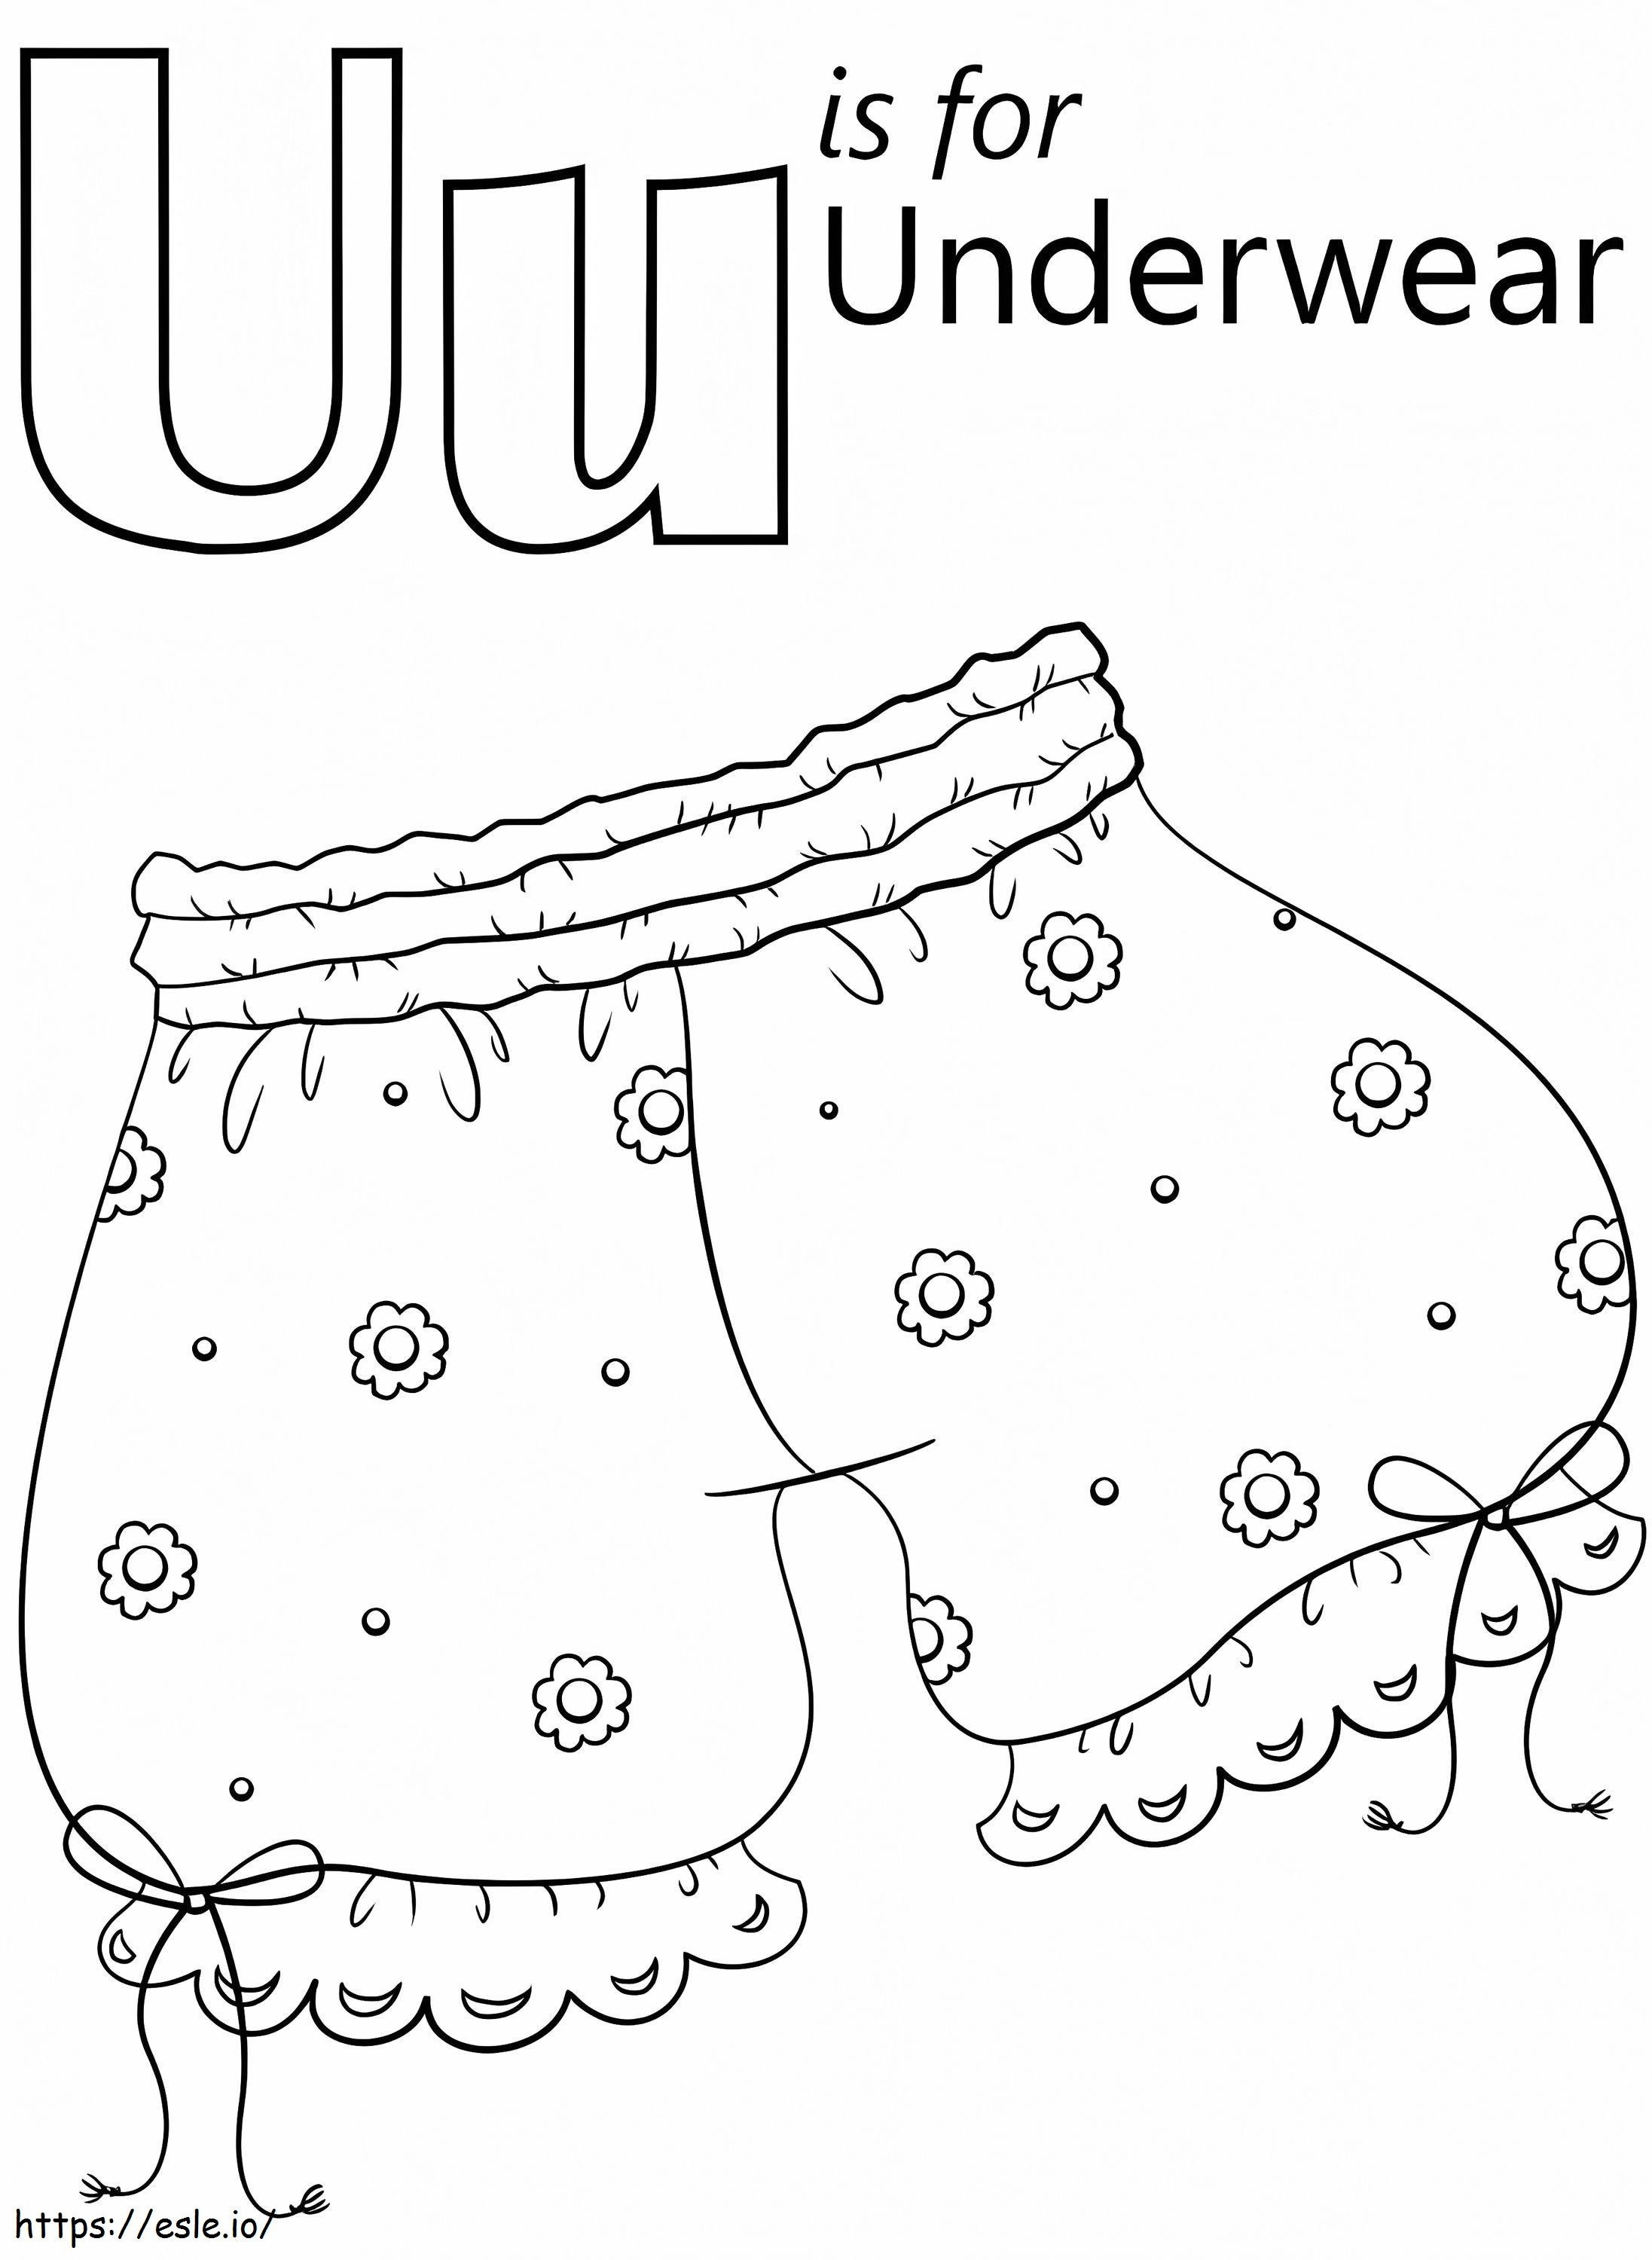 Underwear Letter U coloring page